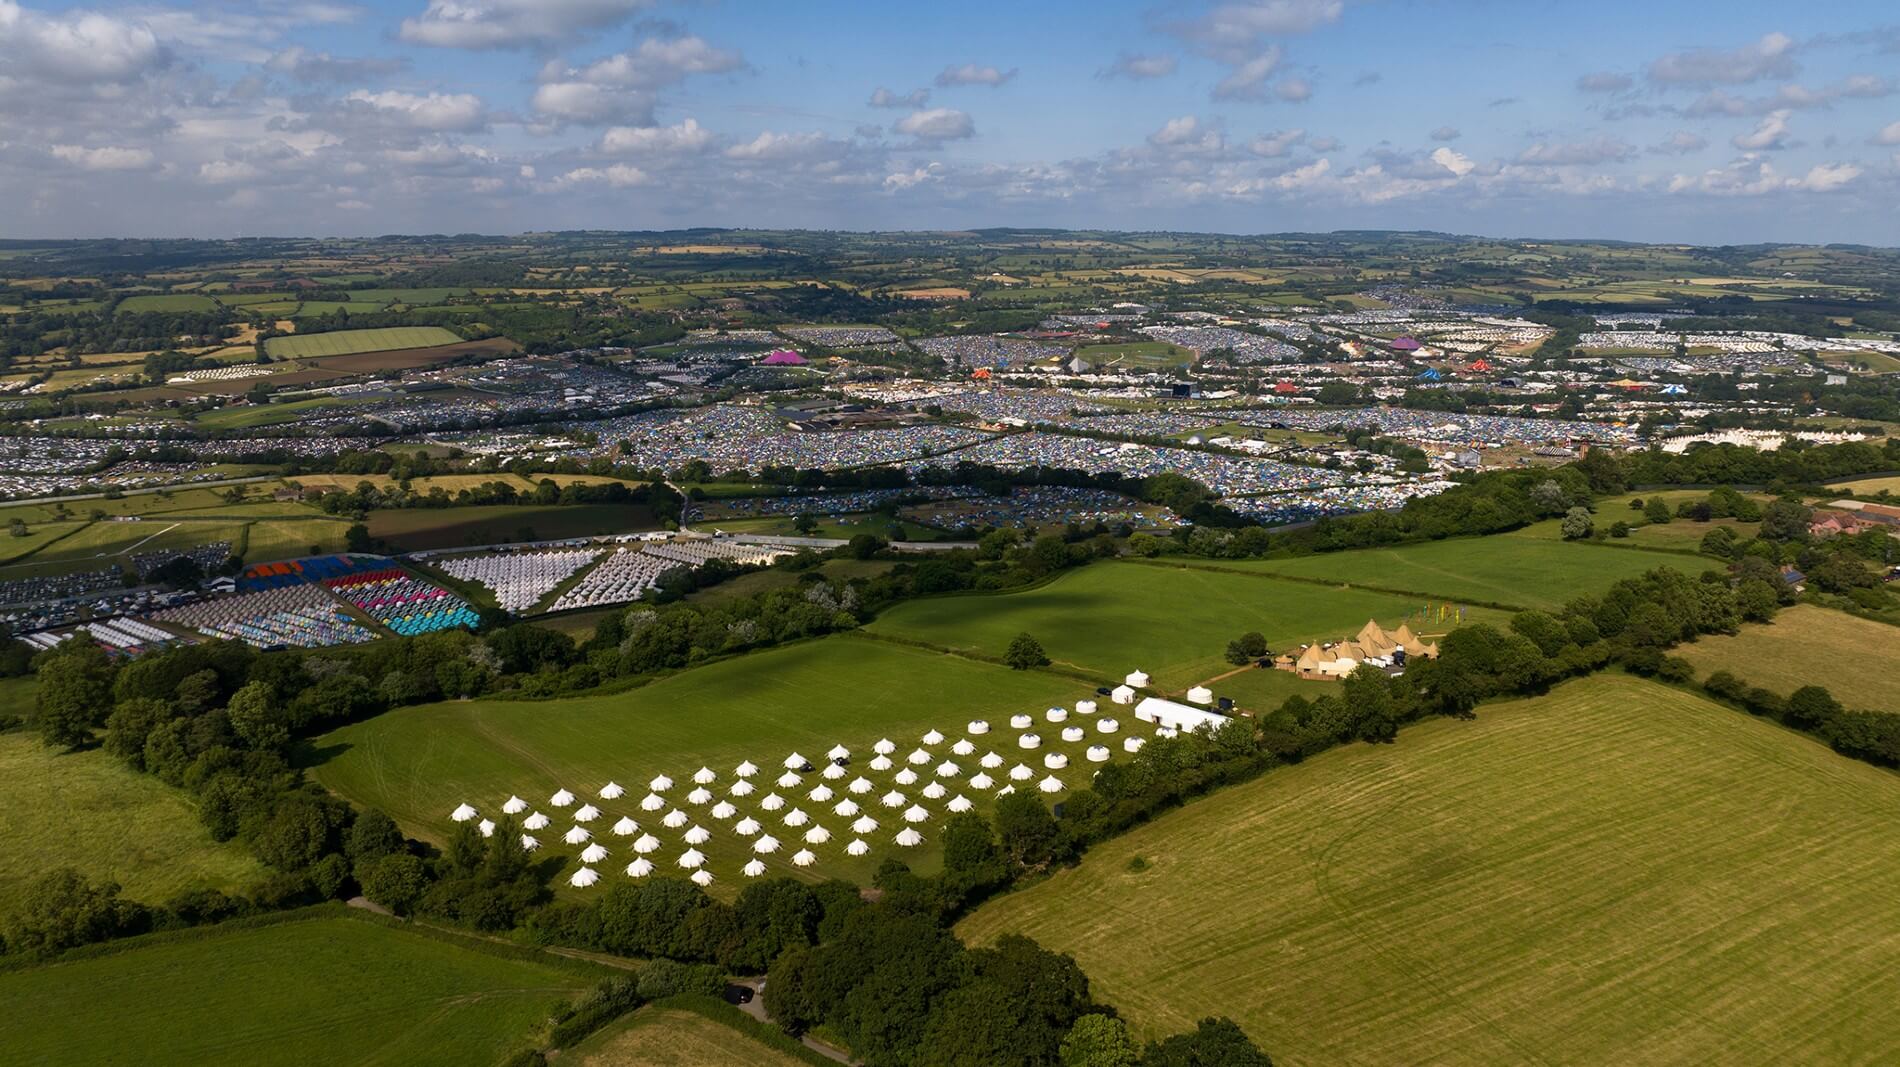 An aerial shot over the Glastonbury Festival site and Pennard Hill Farm Camping Site